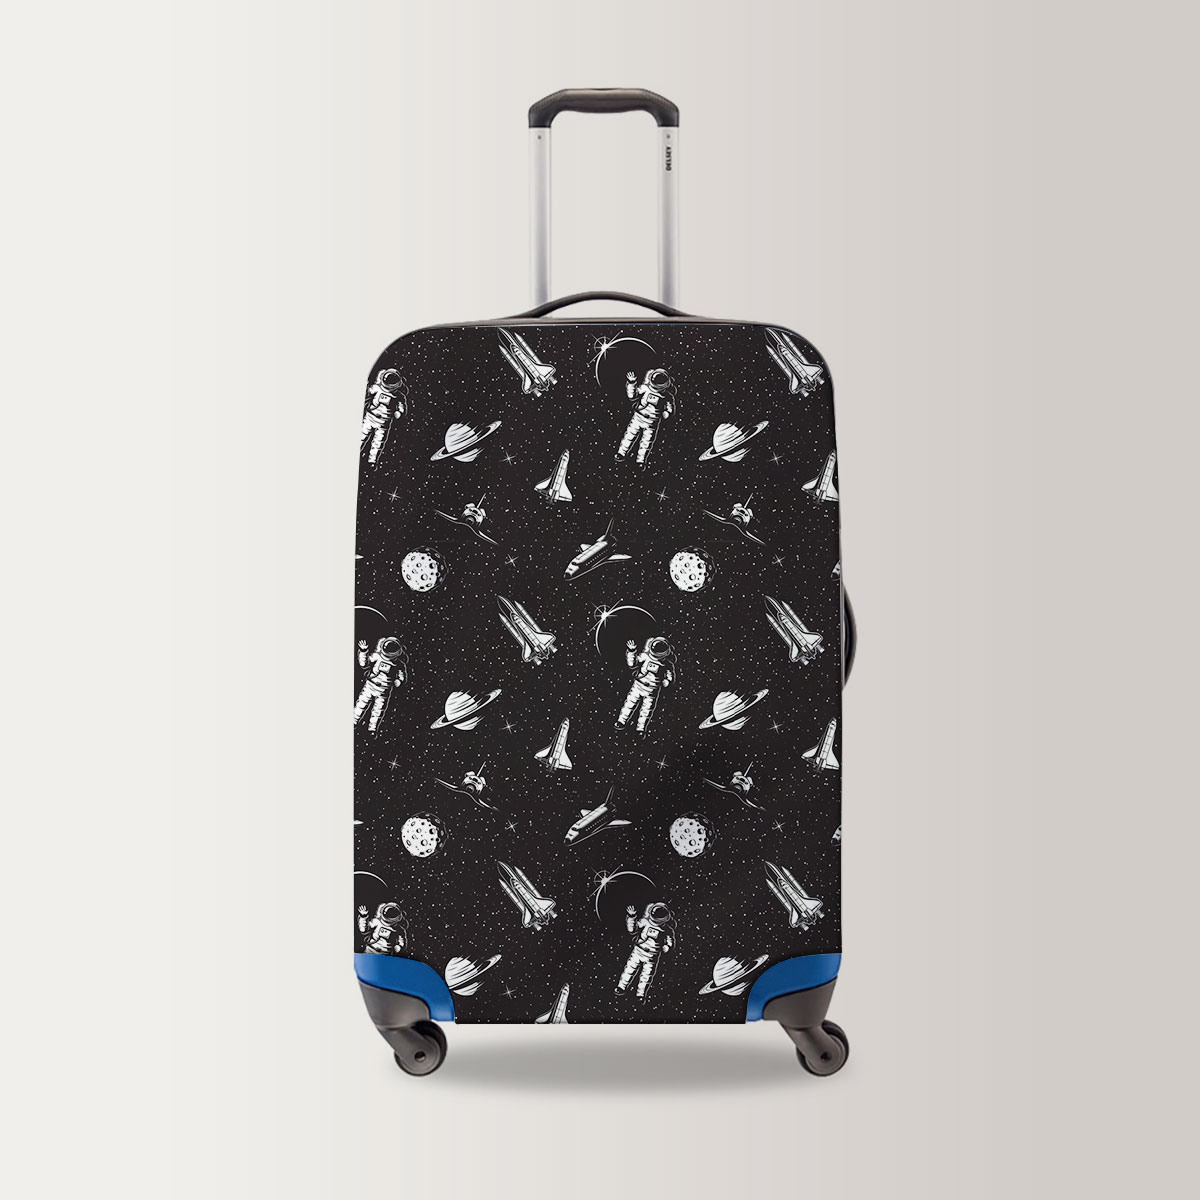 3D Black And White Astronaut Luggage Bag